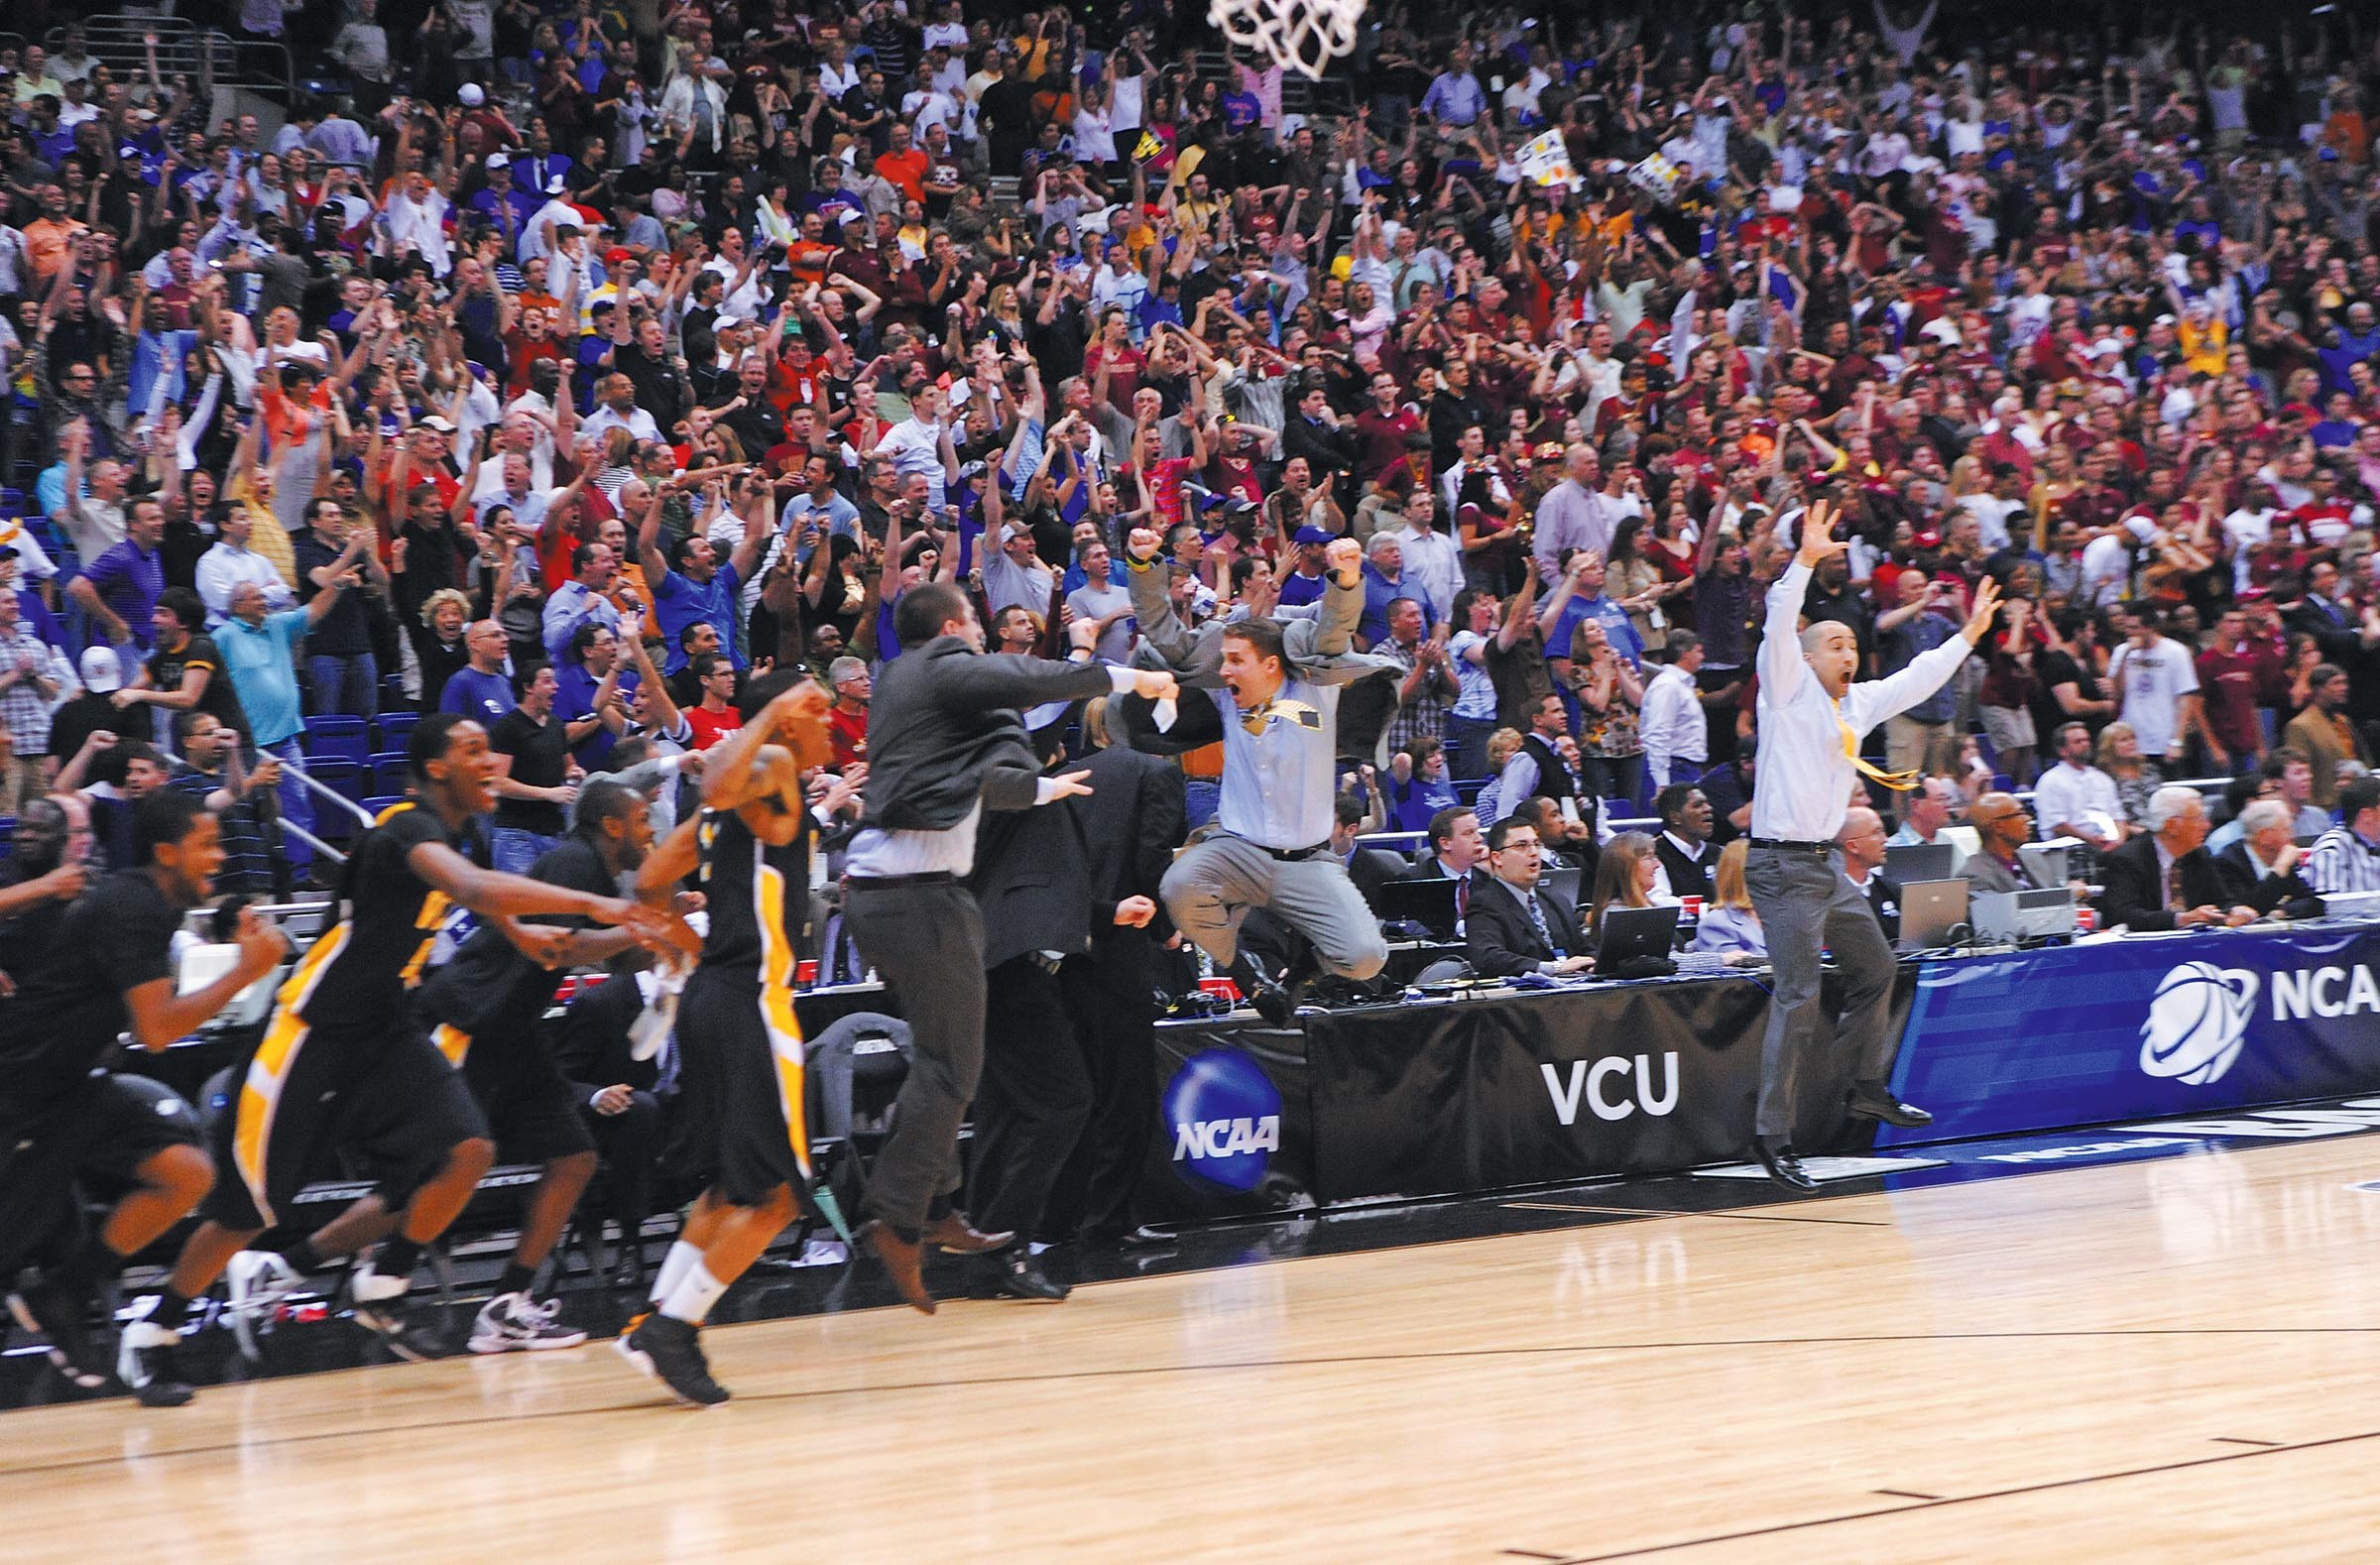 Wade celebrates during his tenure as assistant coach with the Rams, after a win over Kansas sent the team to the Final Four in 2011. - SCOTT ELMQUIST